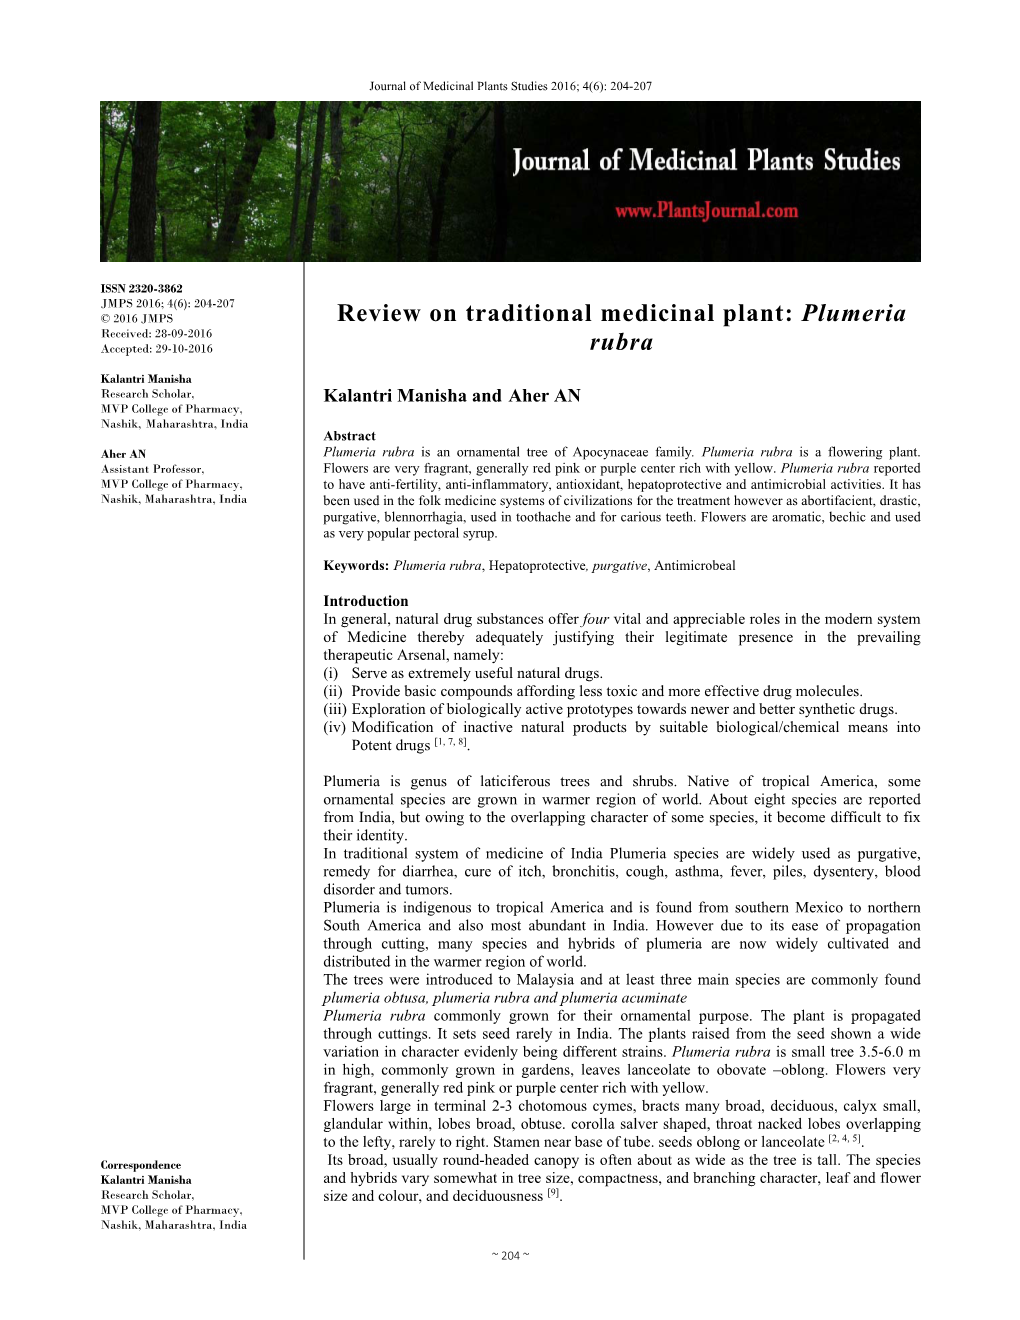 Review on Traditional Medicinal Plant: Plumeria Rubra